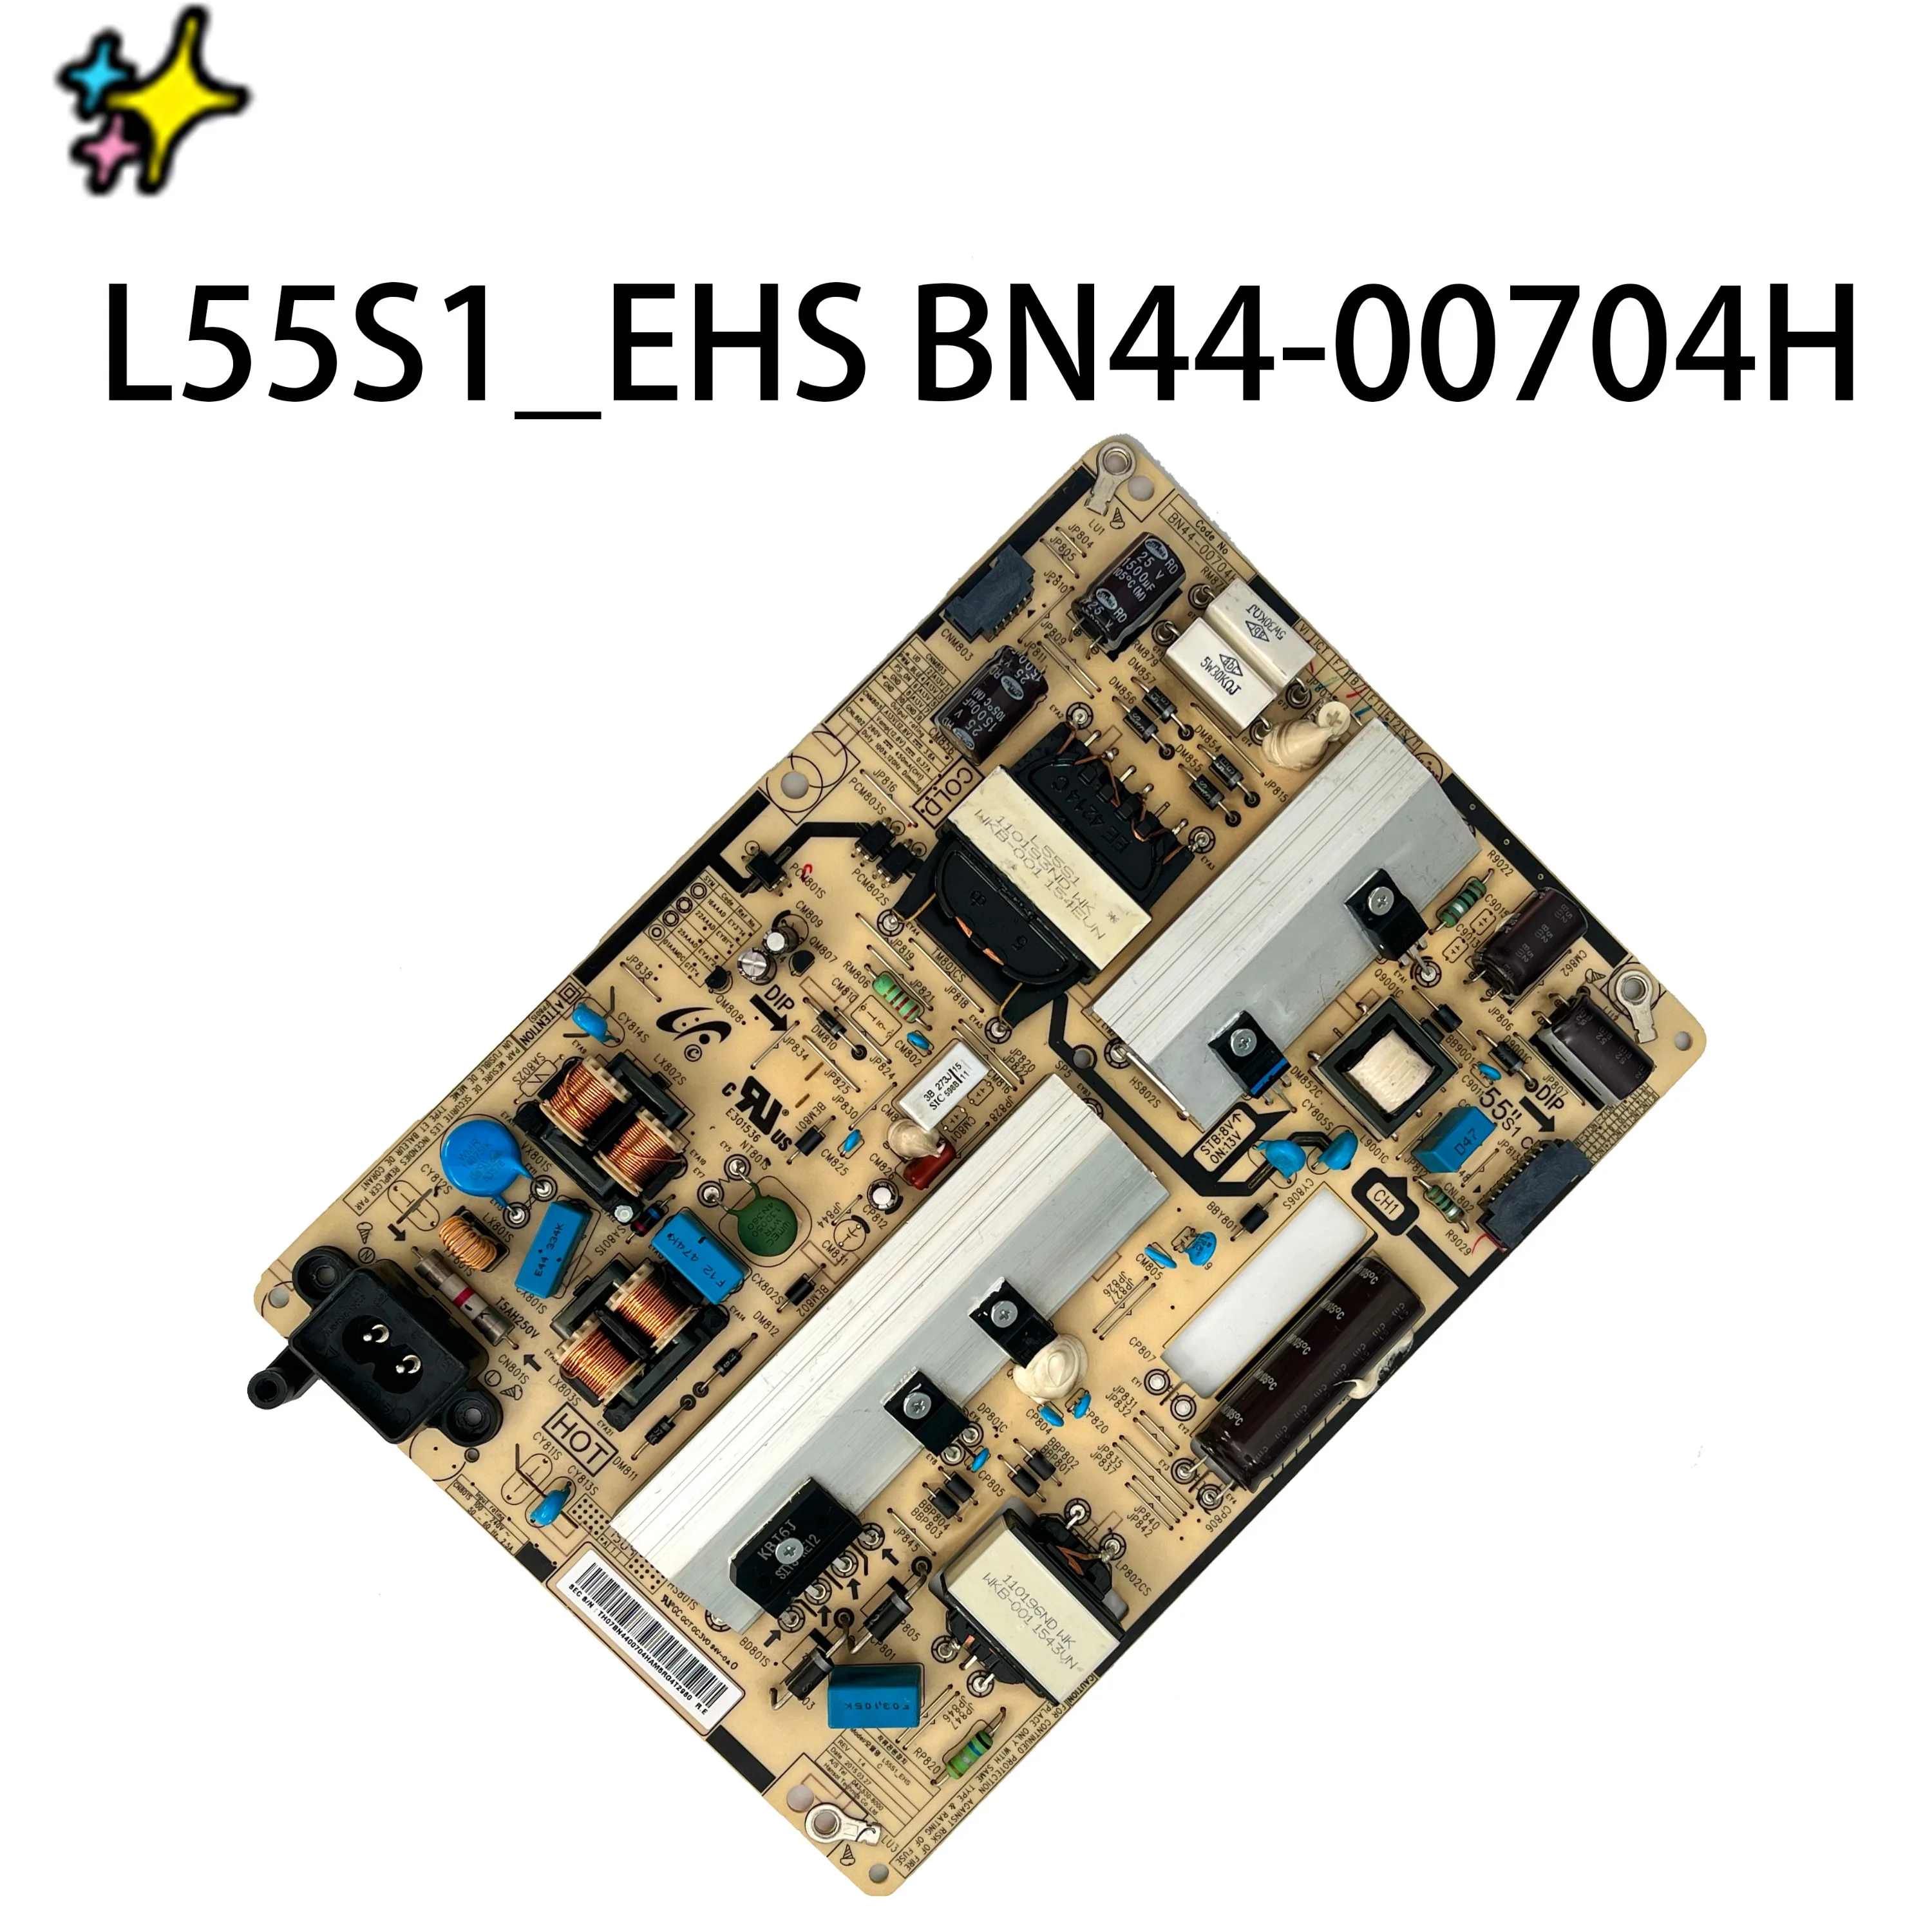 

Authentic Original TV Power Board L55S1_EHS BN44-00704H Works Normally And is for LED TVs UE55J6250SUXZG UE50H5000AK Accessories